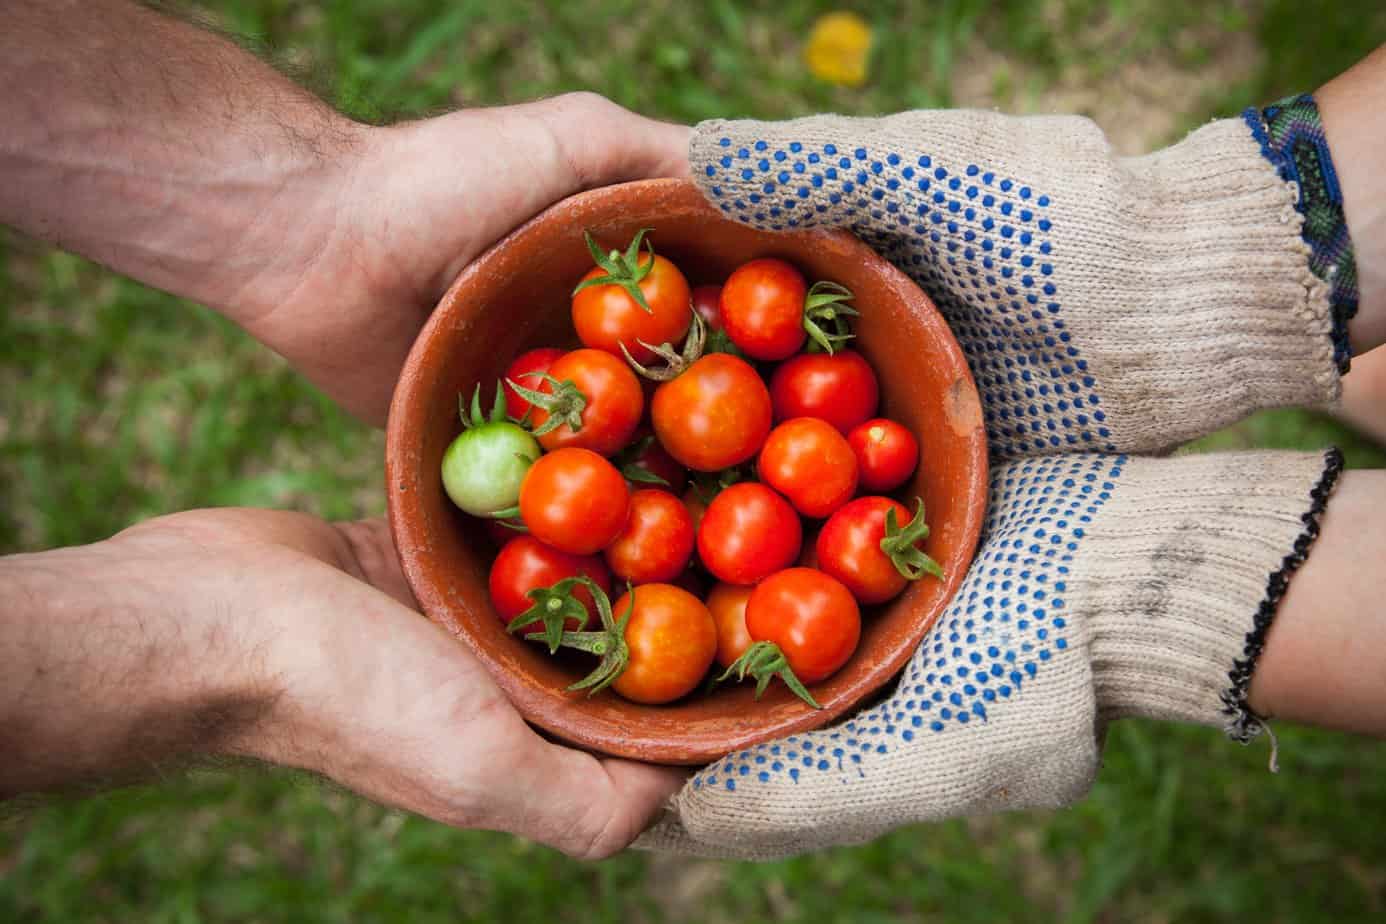 two hands holding a bowl of tomatoes